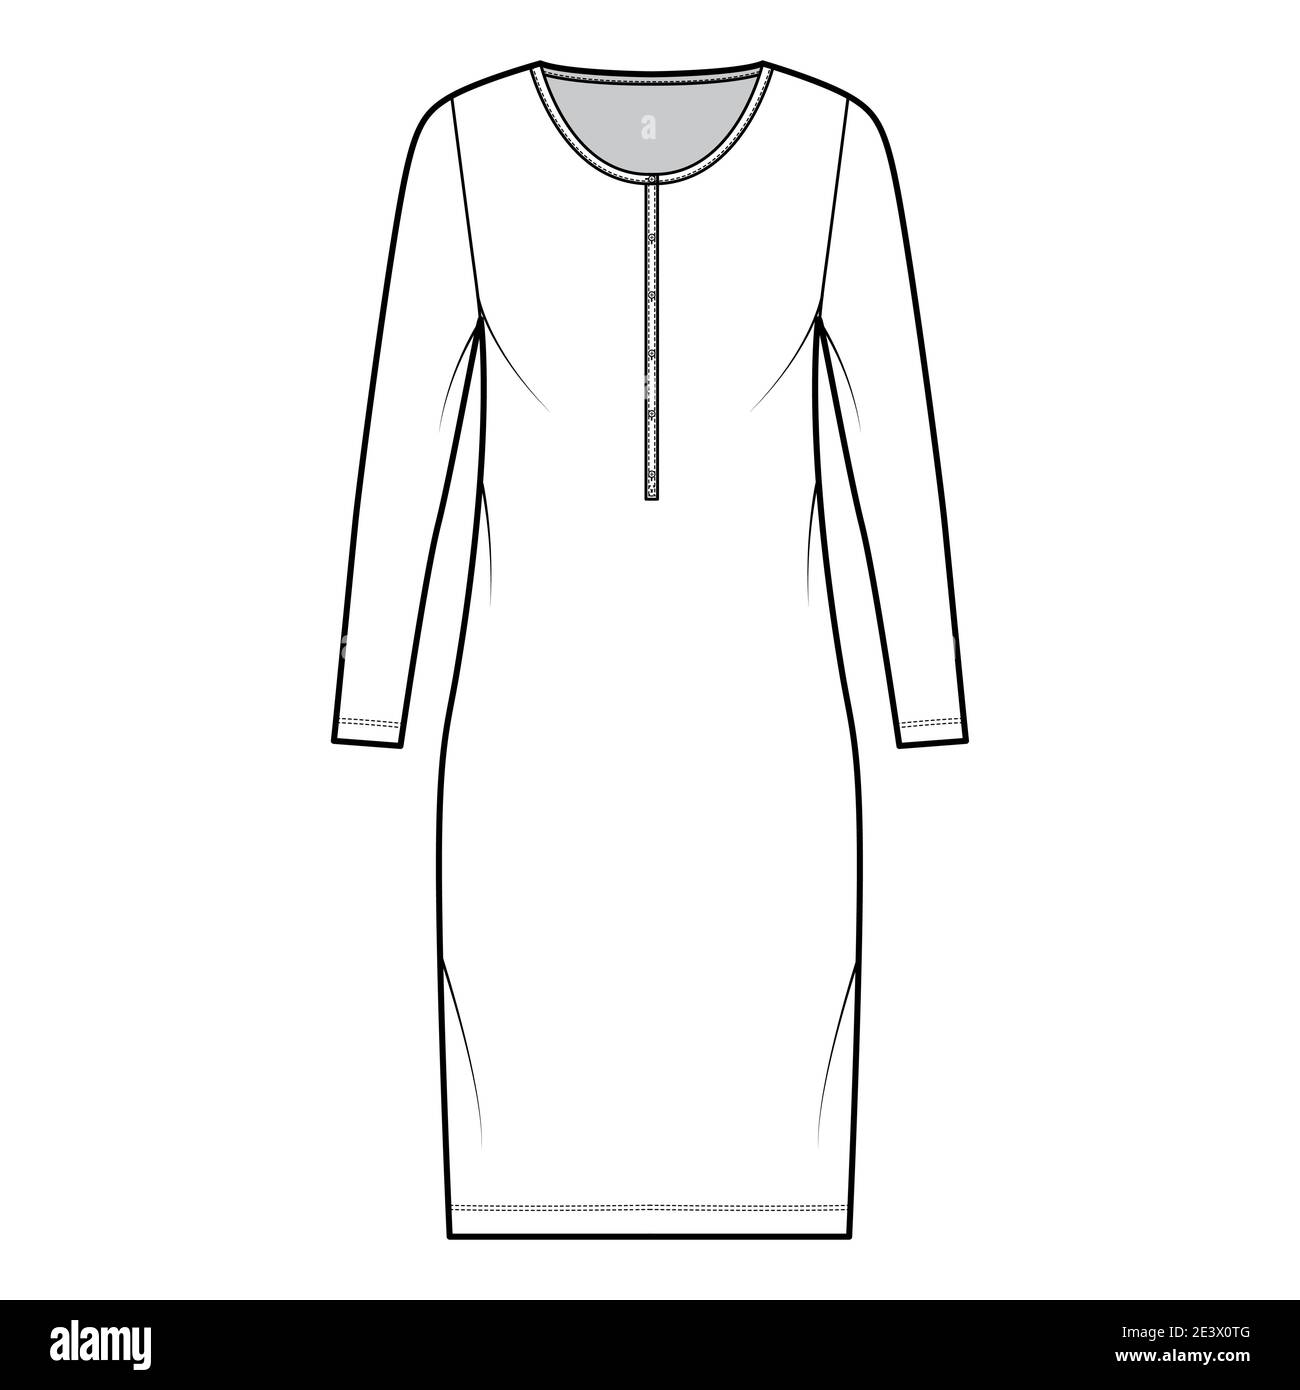 Shirt dress technical fashion illustration with henley neck, long ...